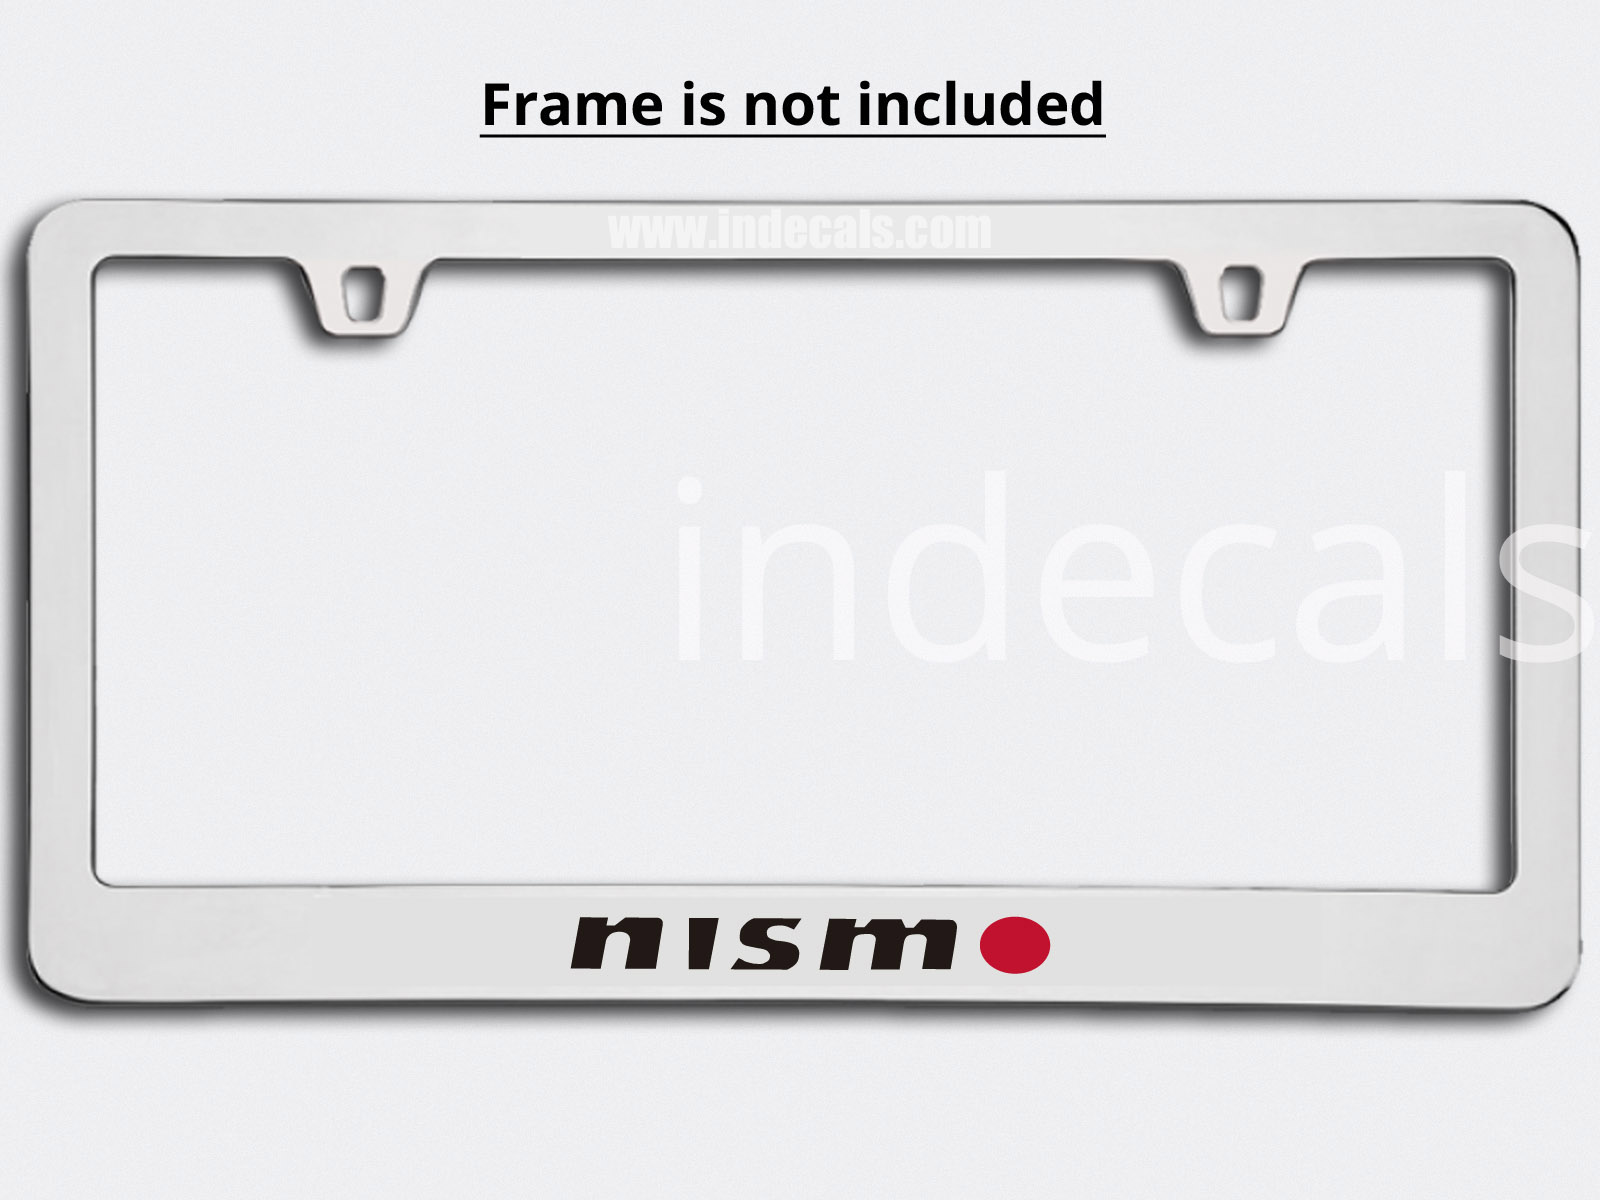 3 x Nismo Stickers for Plate Frame - Black